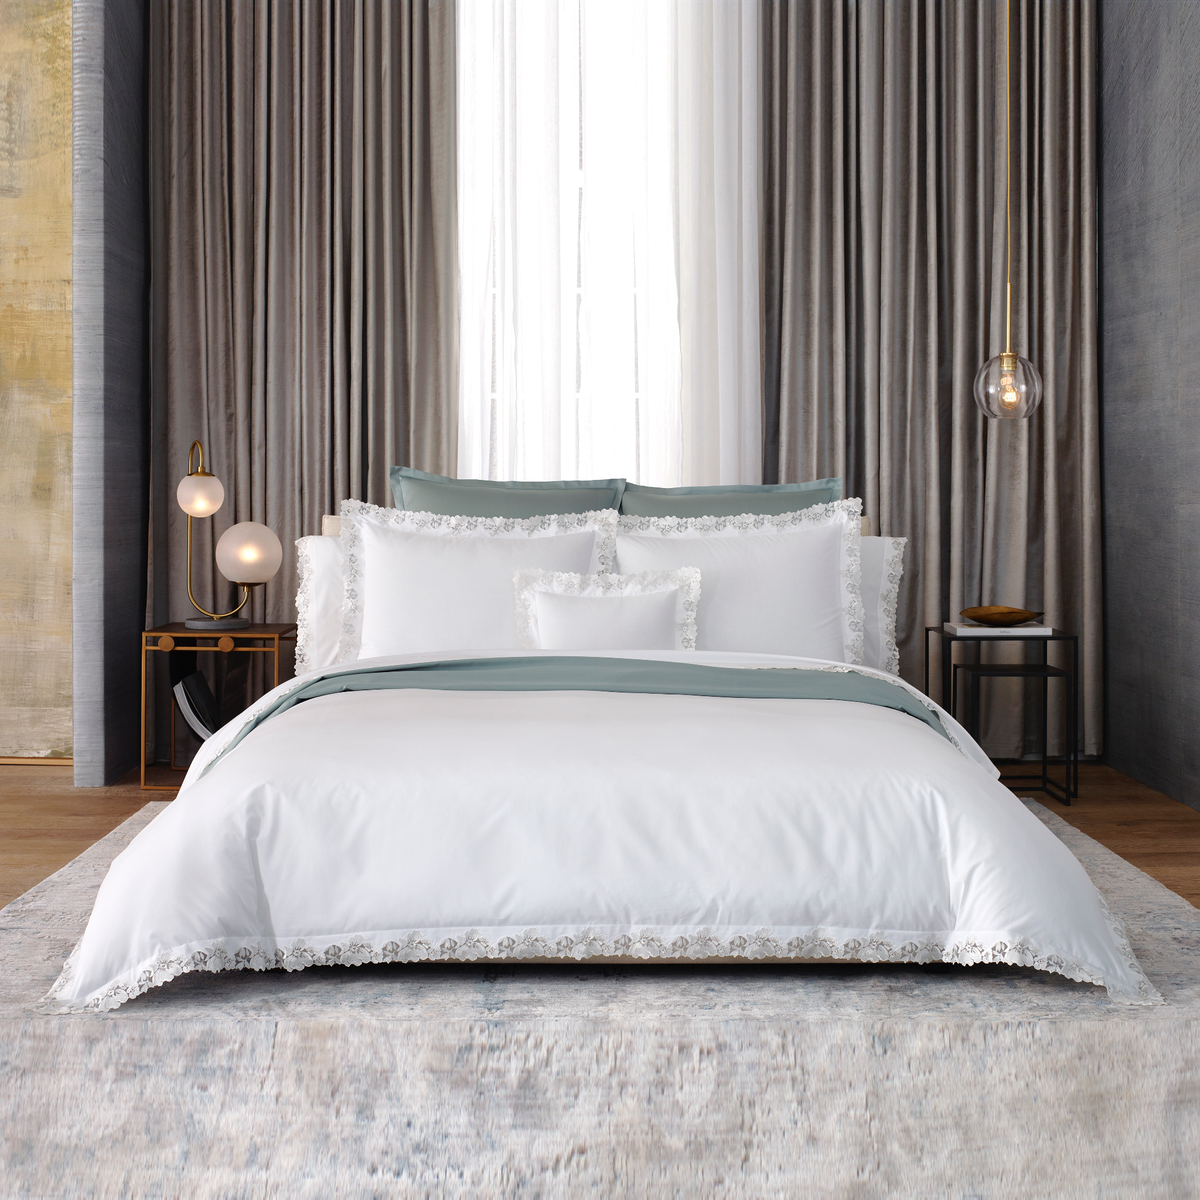 Full Bed with Matouk Virginia Bedding in White Color Together with Talita Satin Stitch Collection